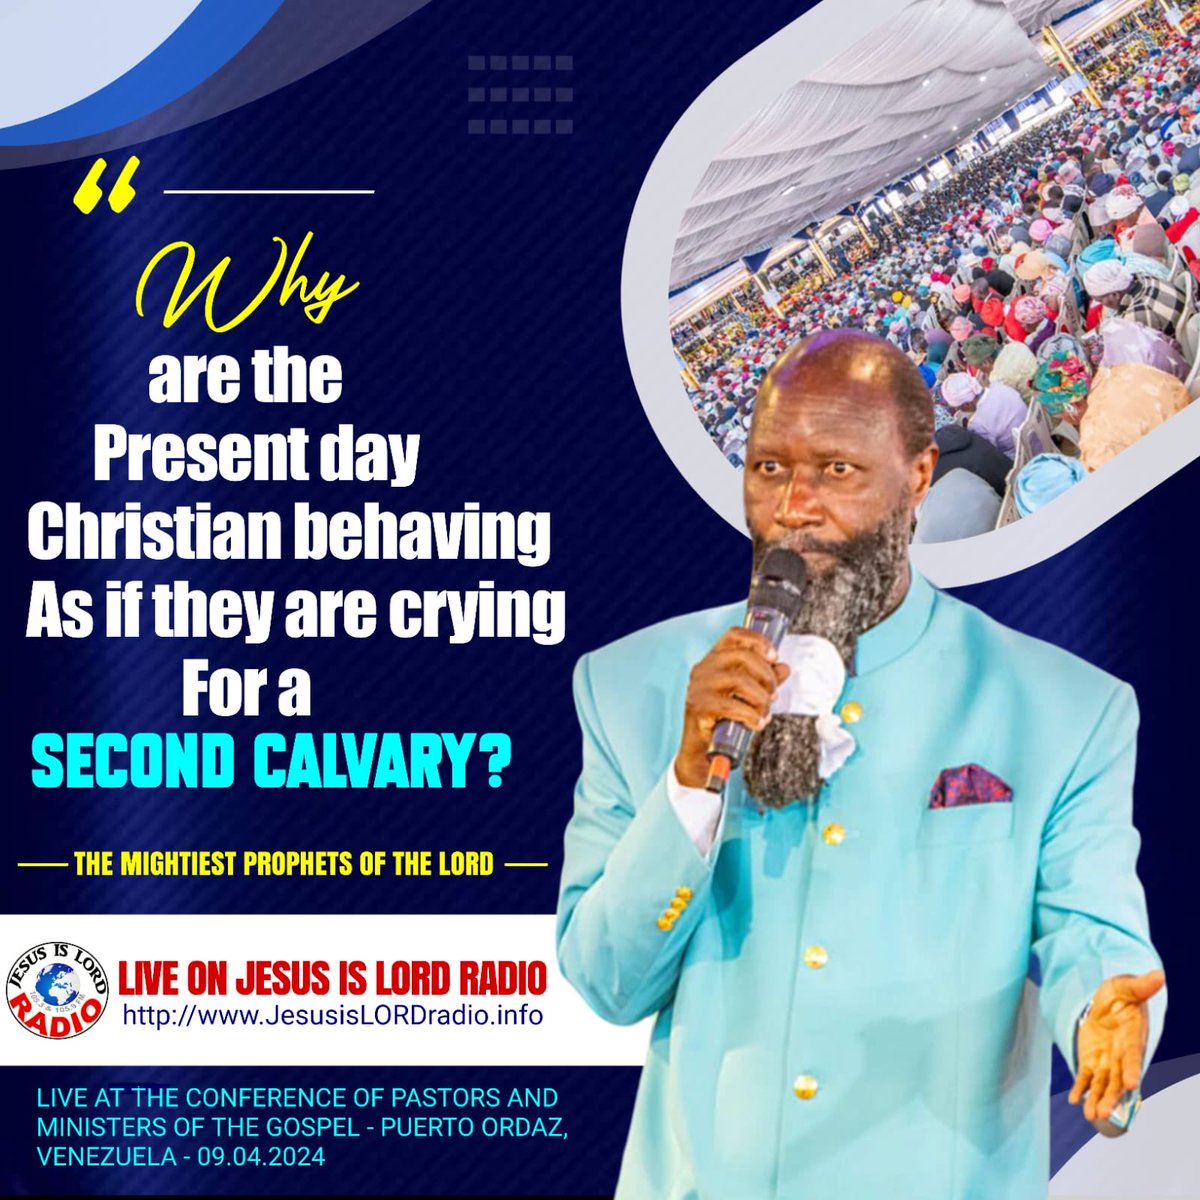 THE CHRISTIAN SALVATION IS NOT A CELEBRATION. IT IS TOTAL WAR! DAILY! WE MUST SEPARATE OUT FROM THE MORAL DECAY OF THIS PRESENT WORLD & FROM PUBLIC OPINION. WE MUST PURSUE RIGHTEOUSNESS AND HOLINESS IN GENUINE REPENTANCE. TIME IS OVER THE MESSIAH IS COMING. #DepartureOfTheHoly